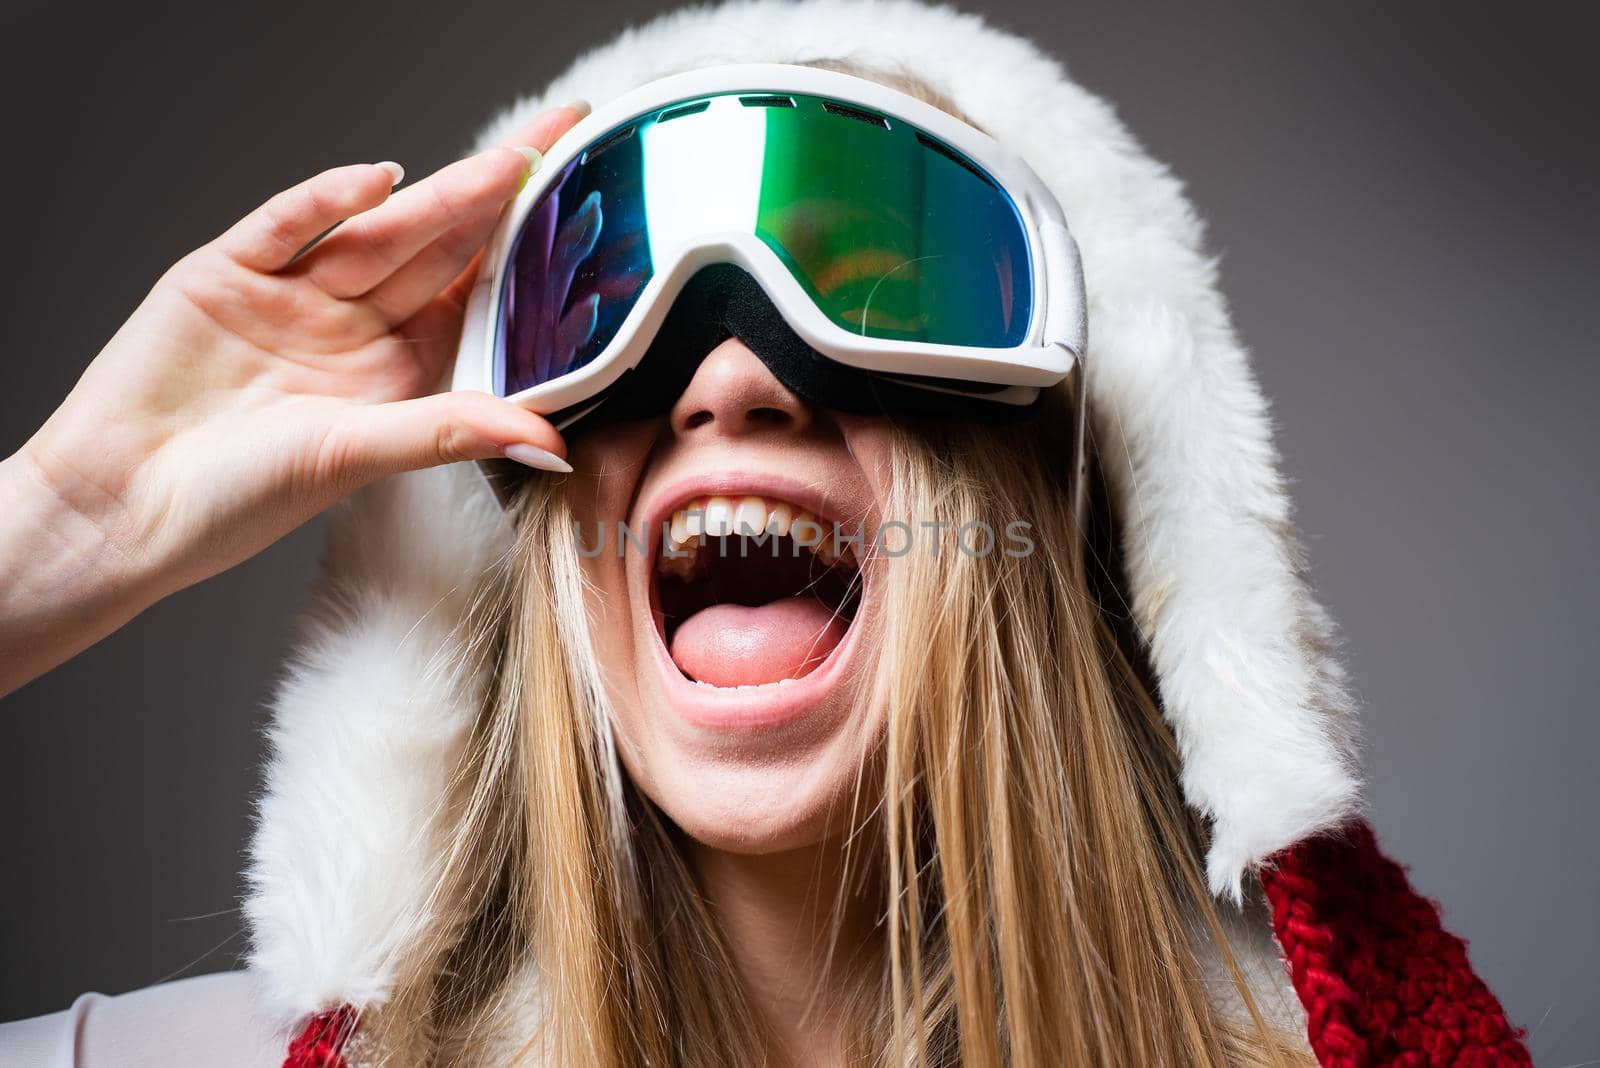 Ski mask. Sport. Extreme sport. Winter leisure. Laughing happy girl with ski mask on grey background. Snowboard glasses. Winter activities. Winter sport and activity. Portrait of a happy young girl isolated